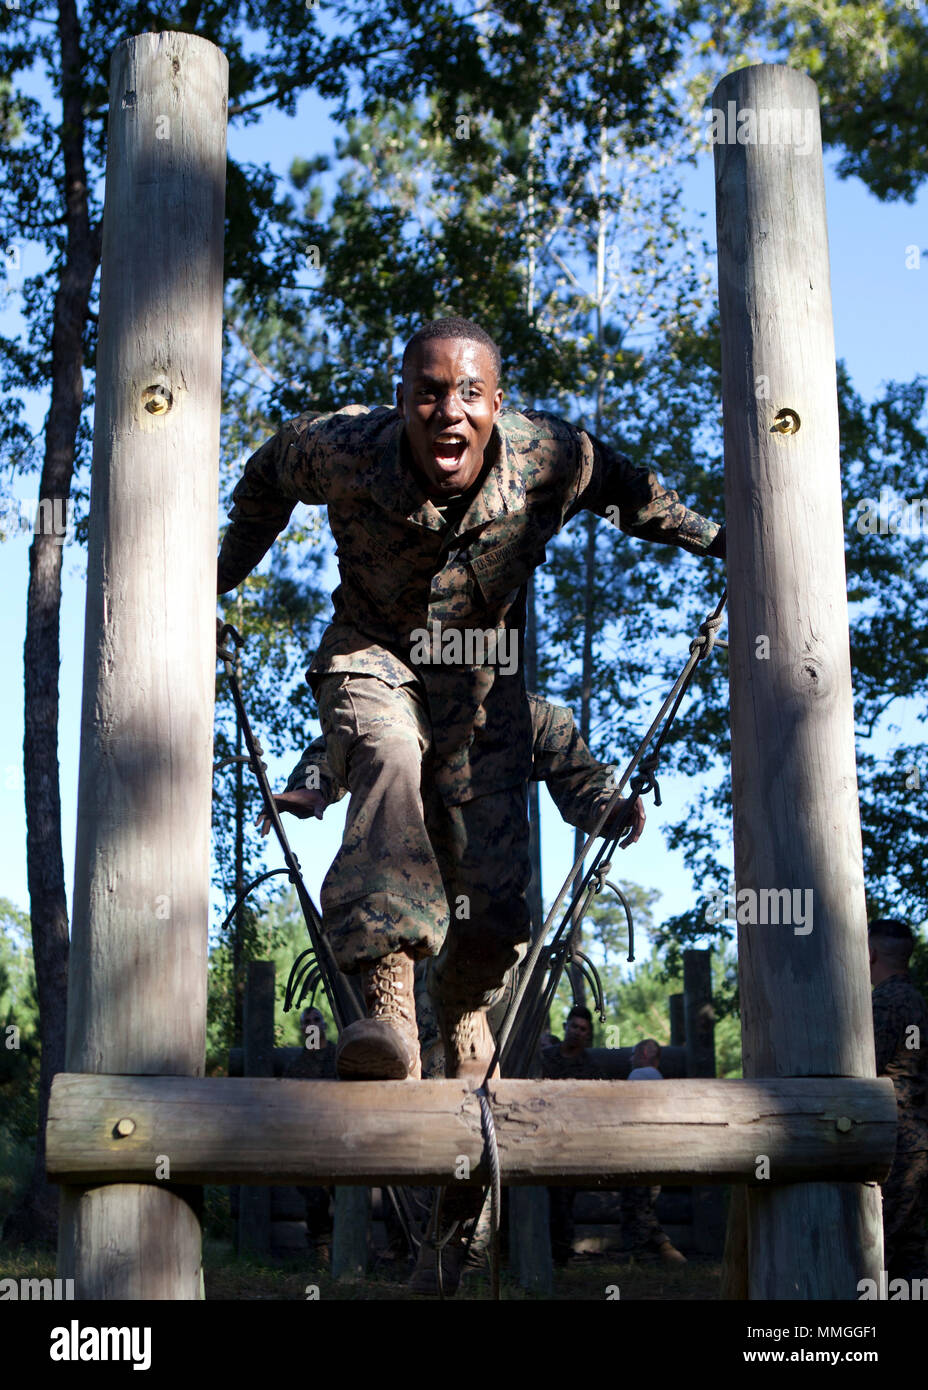 A U.S. Marine assigned to Ground Supply School (GSS), Marine Corps Combat Service Support Schools, crosses a rope bridge during the GSS Spartan Challenge at Camp Johnson, N.C., Oct. 18, 2017. The Marines of GSS conducted different obstacle courses to ensure combat conditioning and unit cohesion. (U.S. Marine Corps photo taken by Lance Cpl. Luis E. Zamot III) Stock Photo